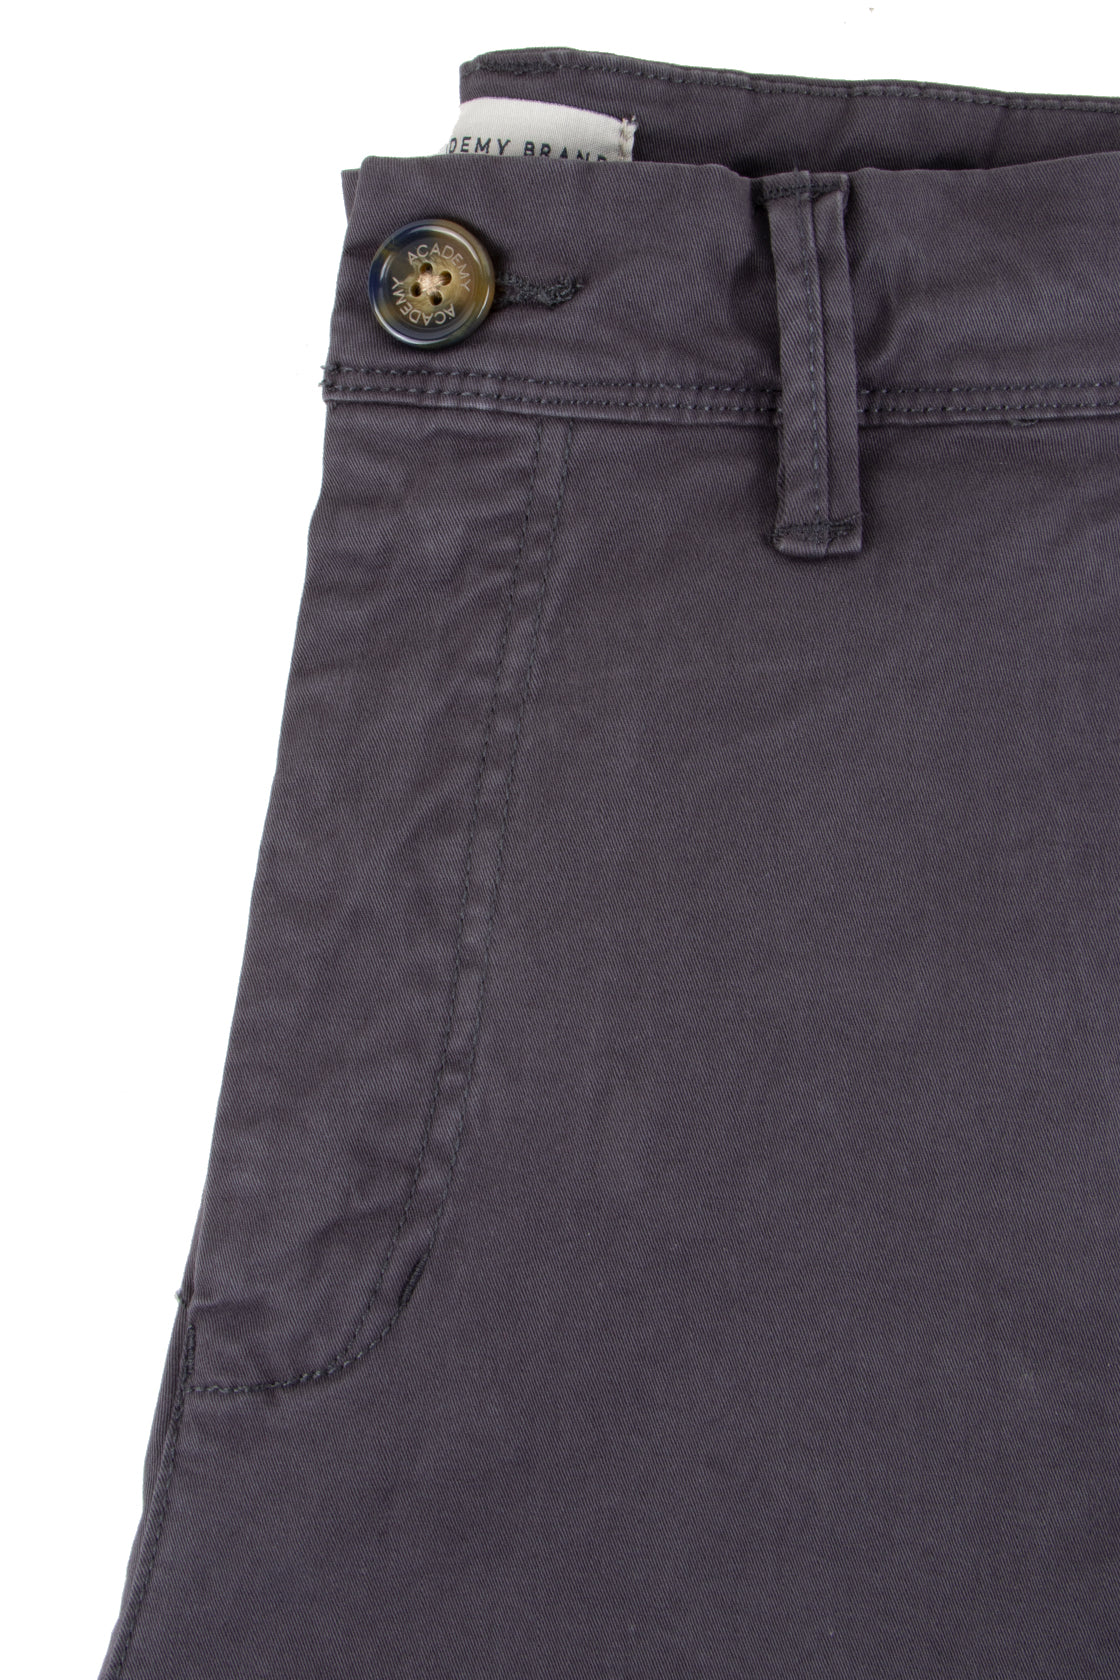 The Academy Brand Cooper Chino Short Charcoal